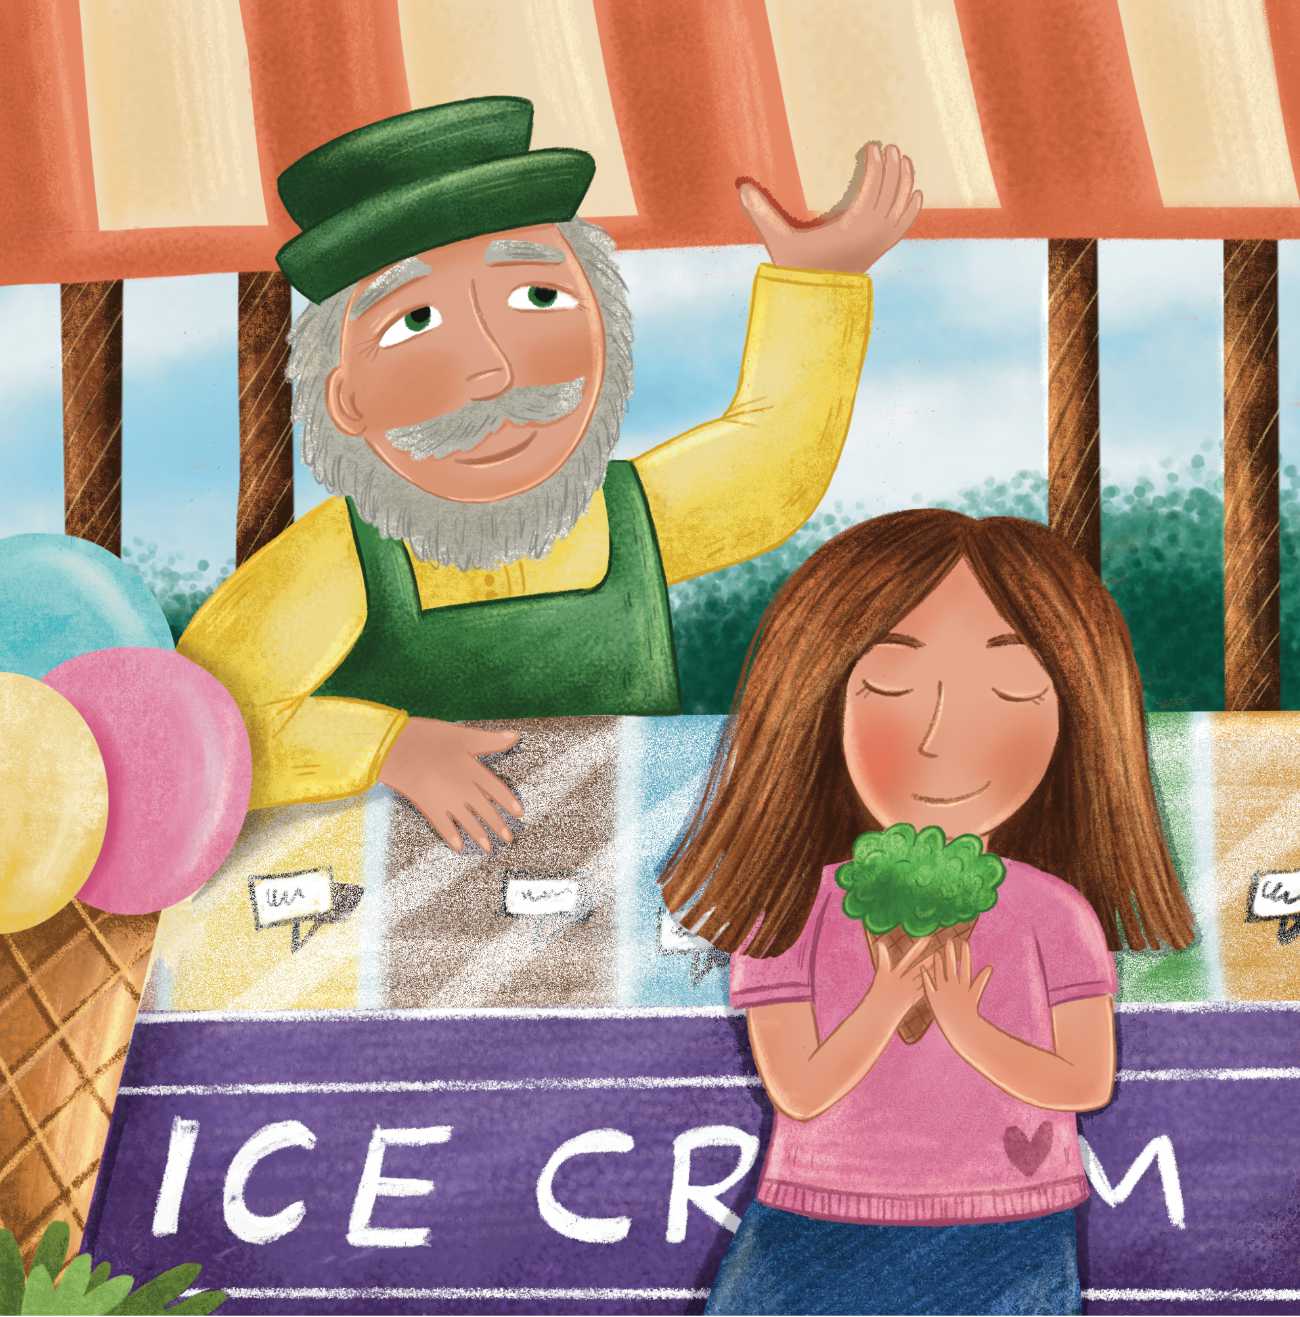 Bedtime Stories The Worlds Best Ice Cream by Jade Maitre short stories for kids page 40